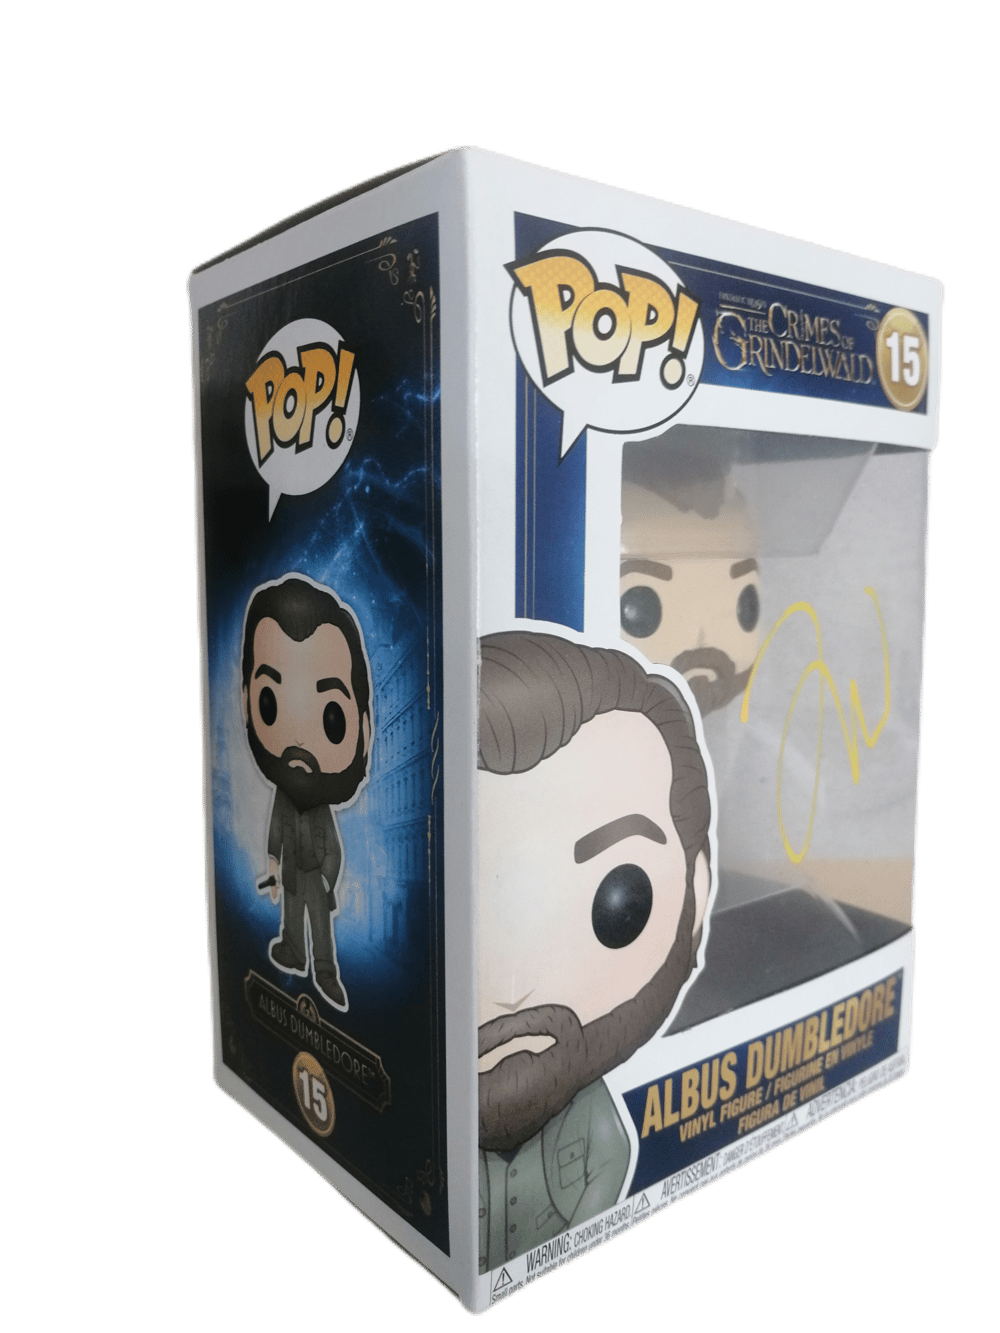 Jude law Fantastic Beasts Signed Pop